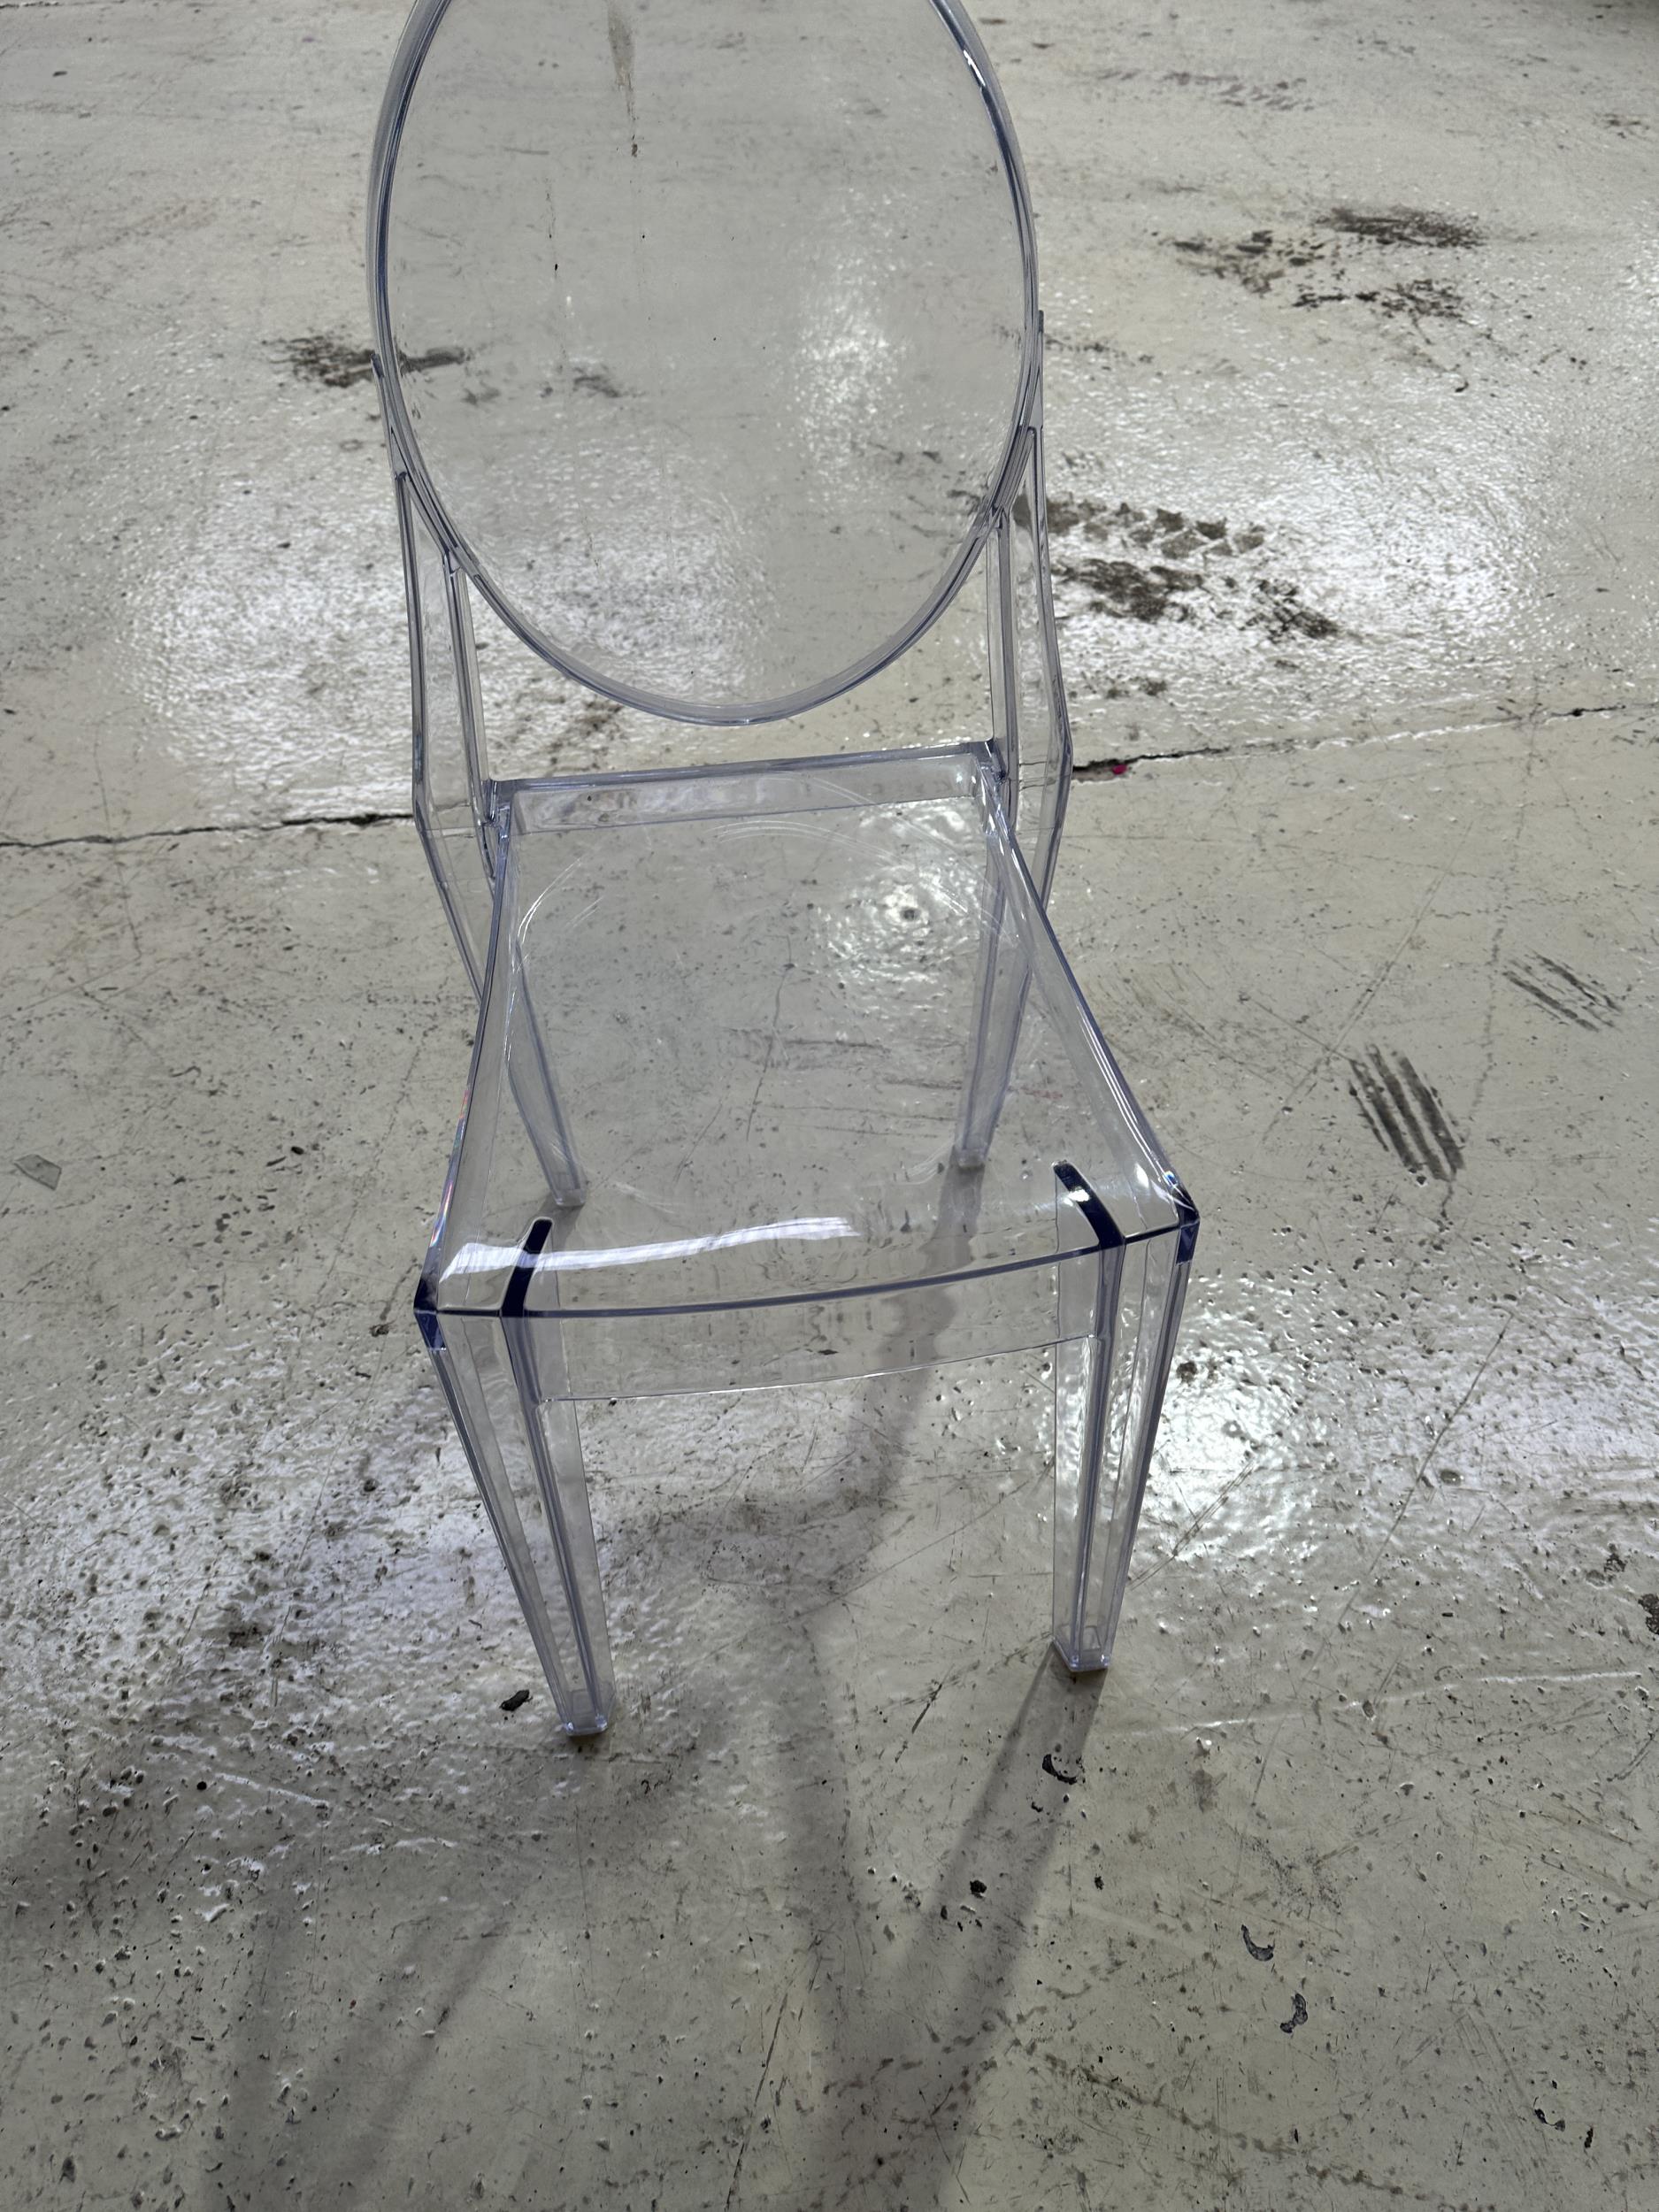 SEVEN MODERN CLEAR PLASTIC STACKING CHAIRS (FROM A DEVELOPER'S SHOW HOME - BELIEVED UNUSED) - Image 2 of 4